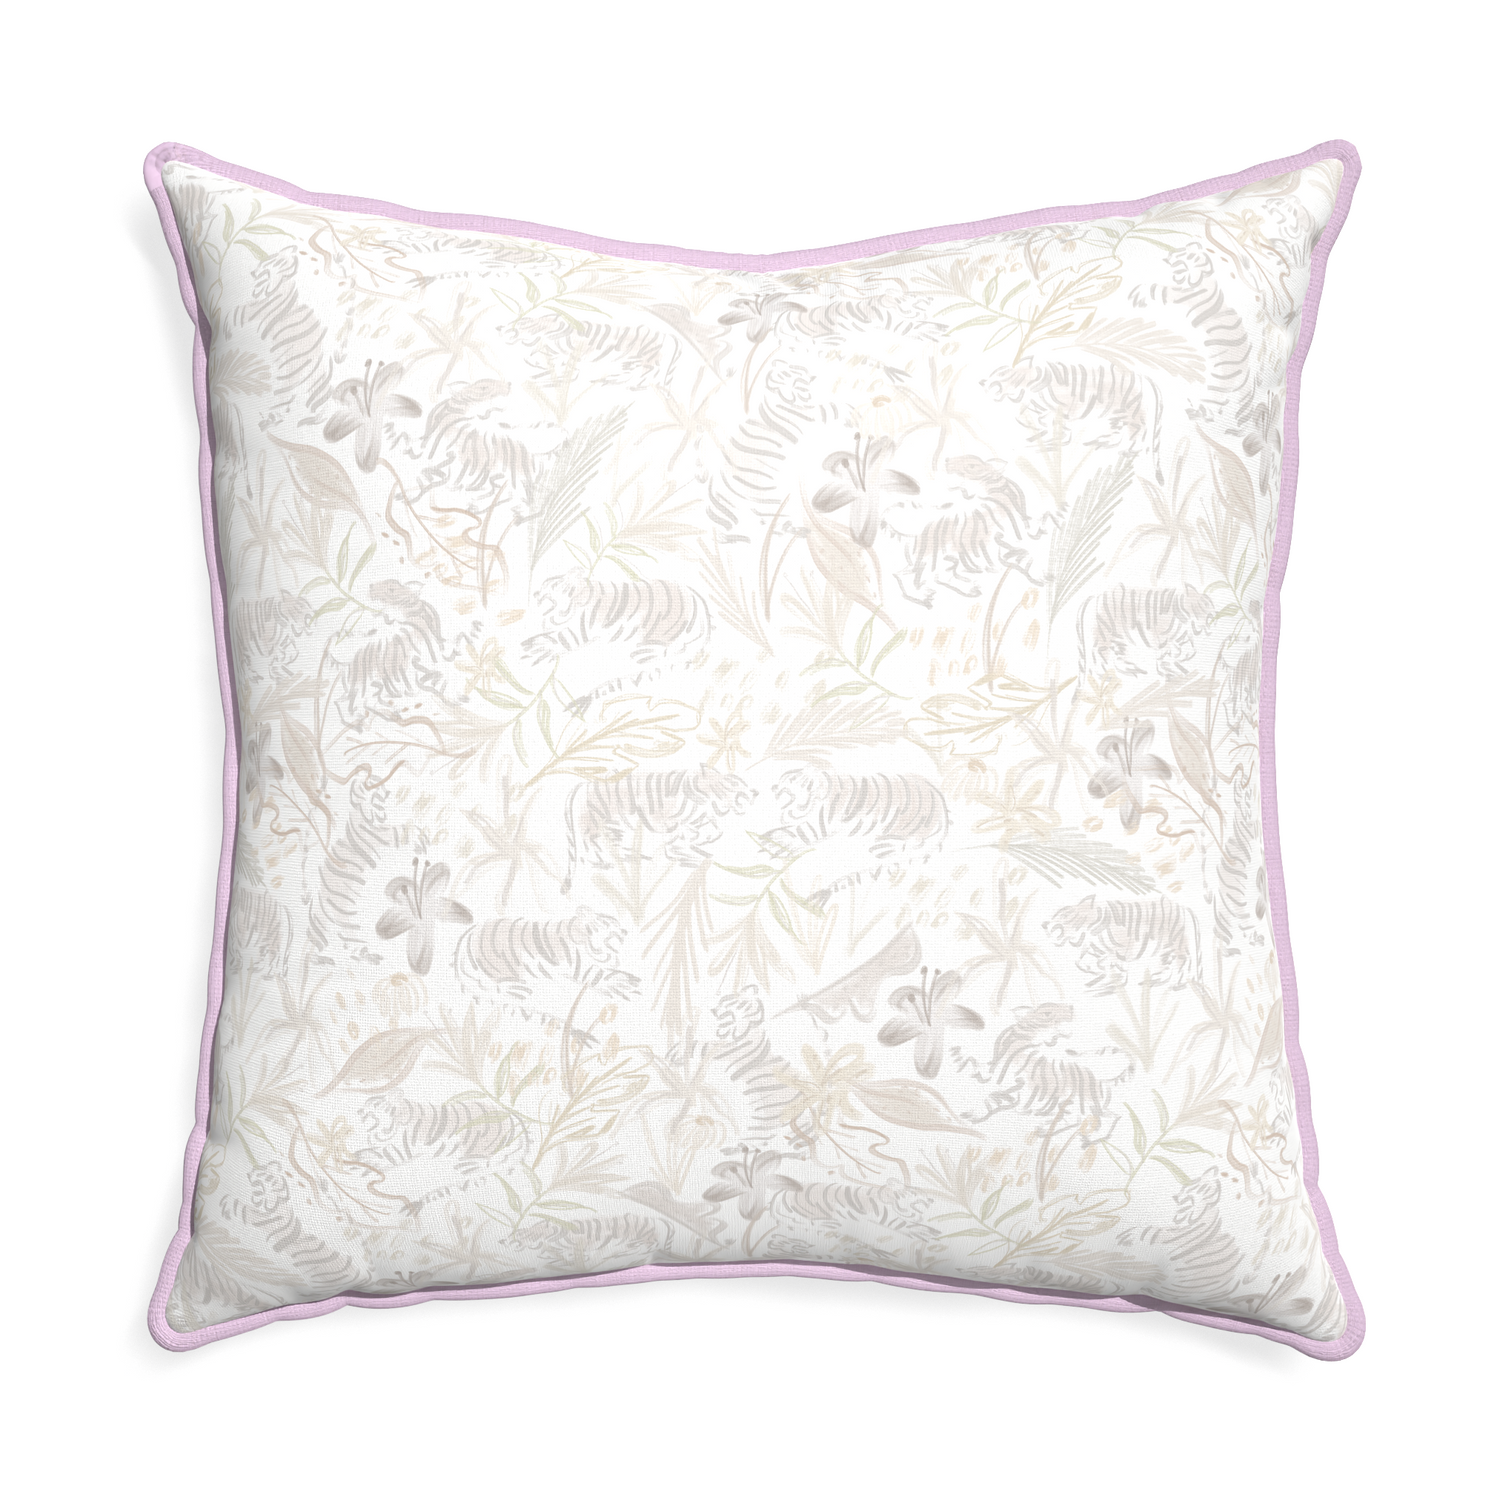 Euro-sham frida sand custom pillow with l piping on white background